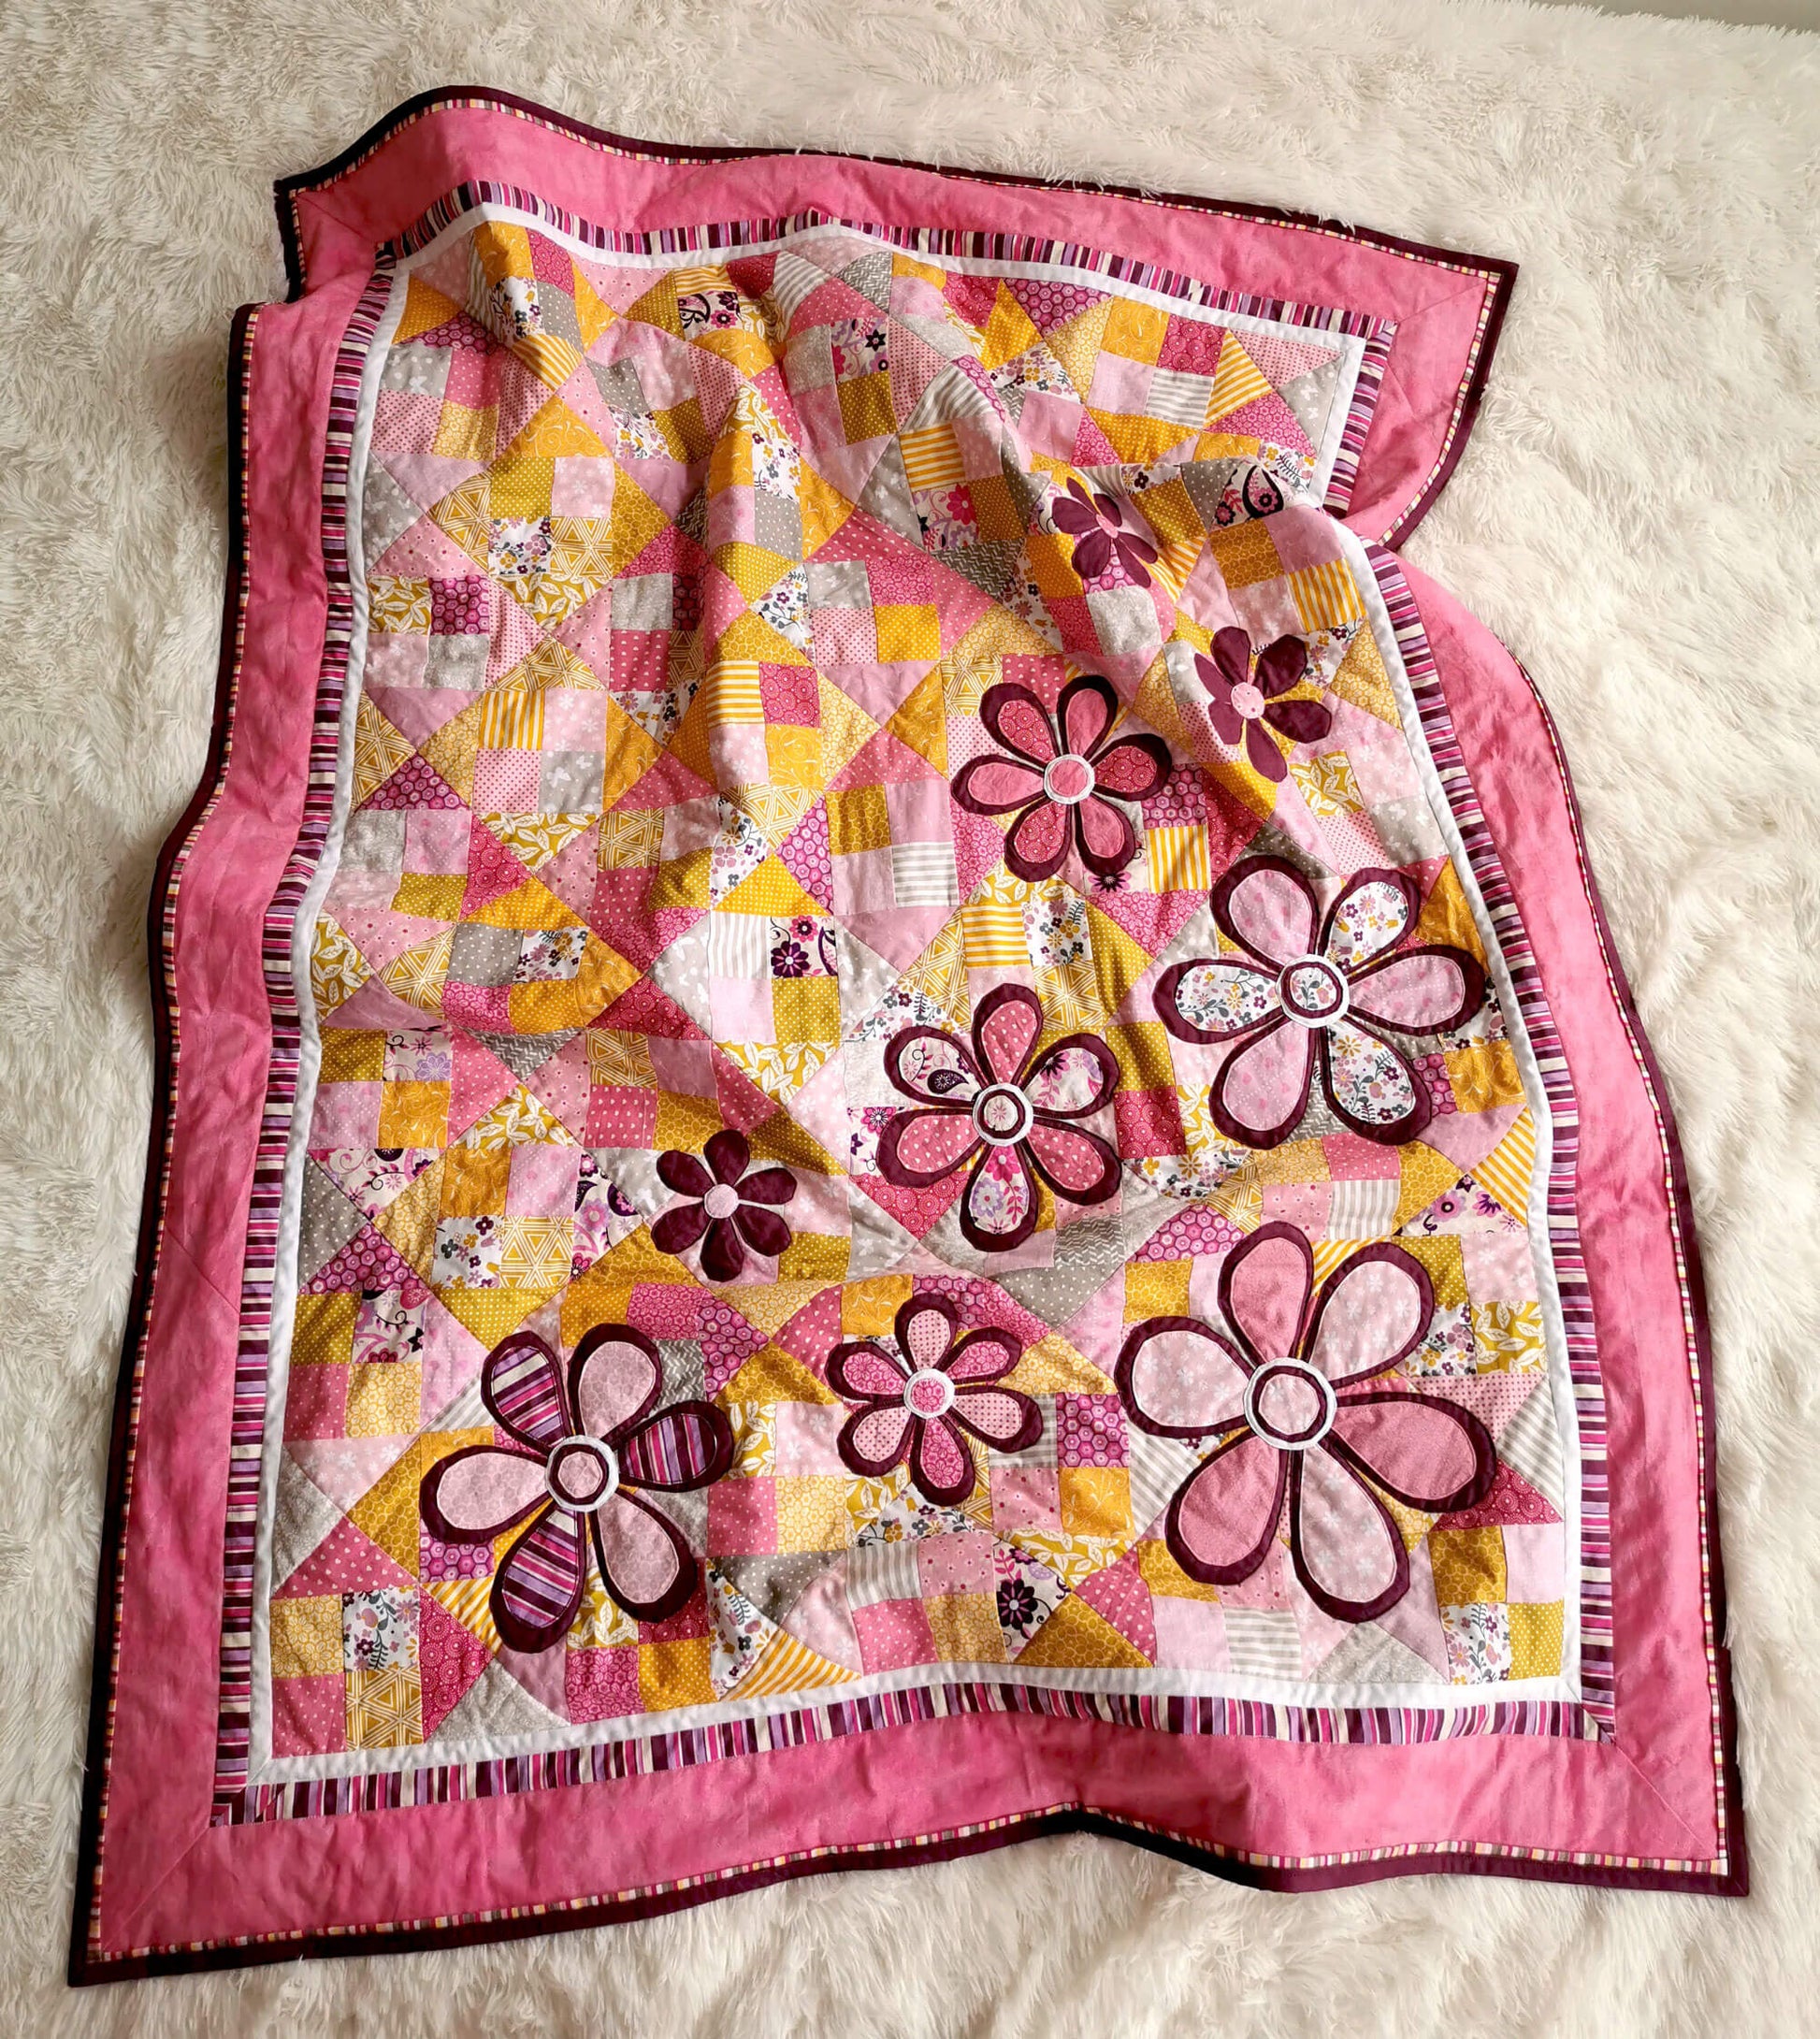 Darling girl's quilt with flowers "Blooming Meadow"